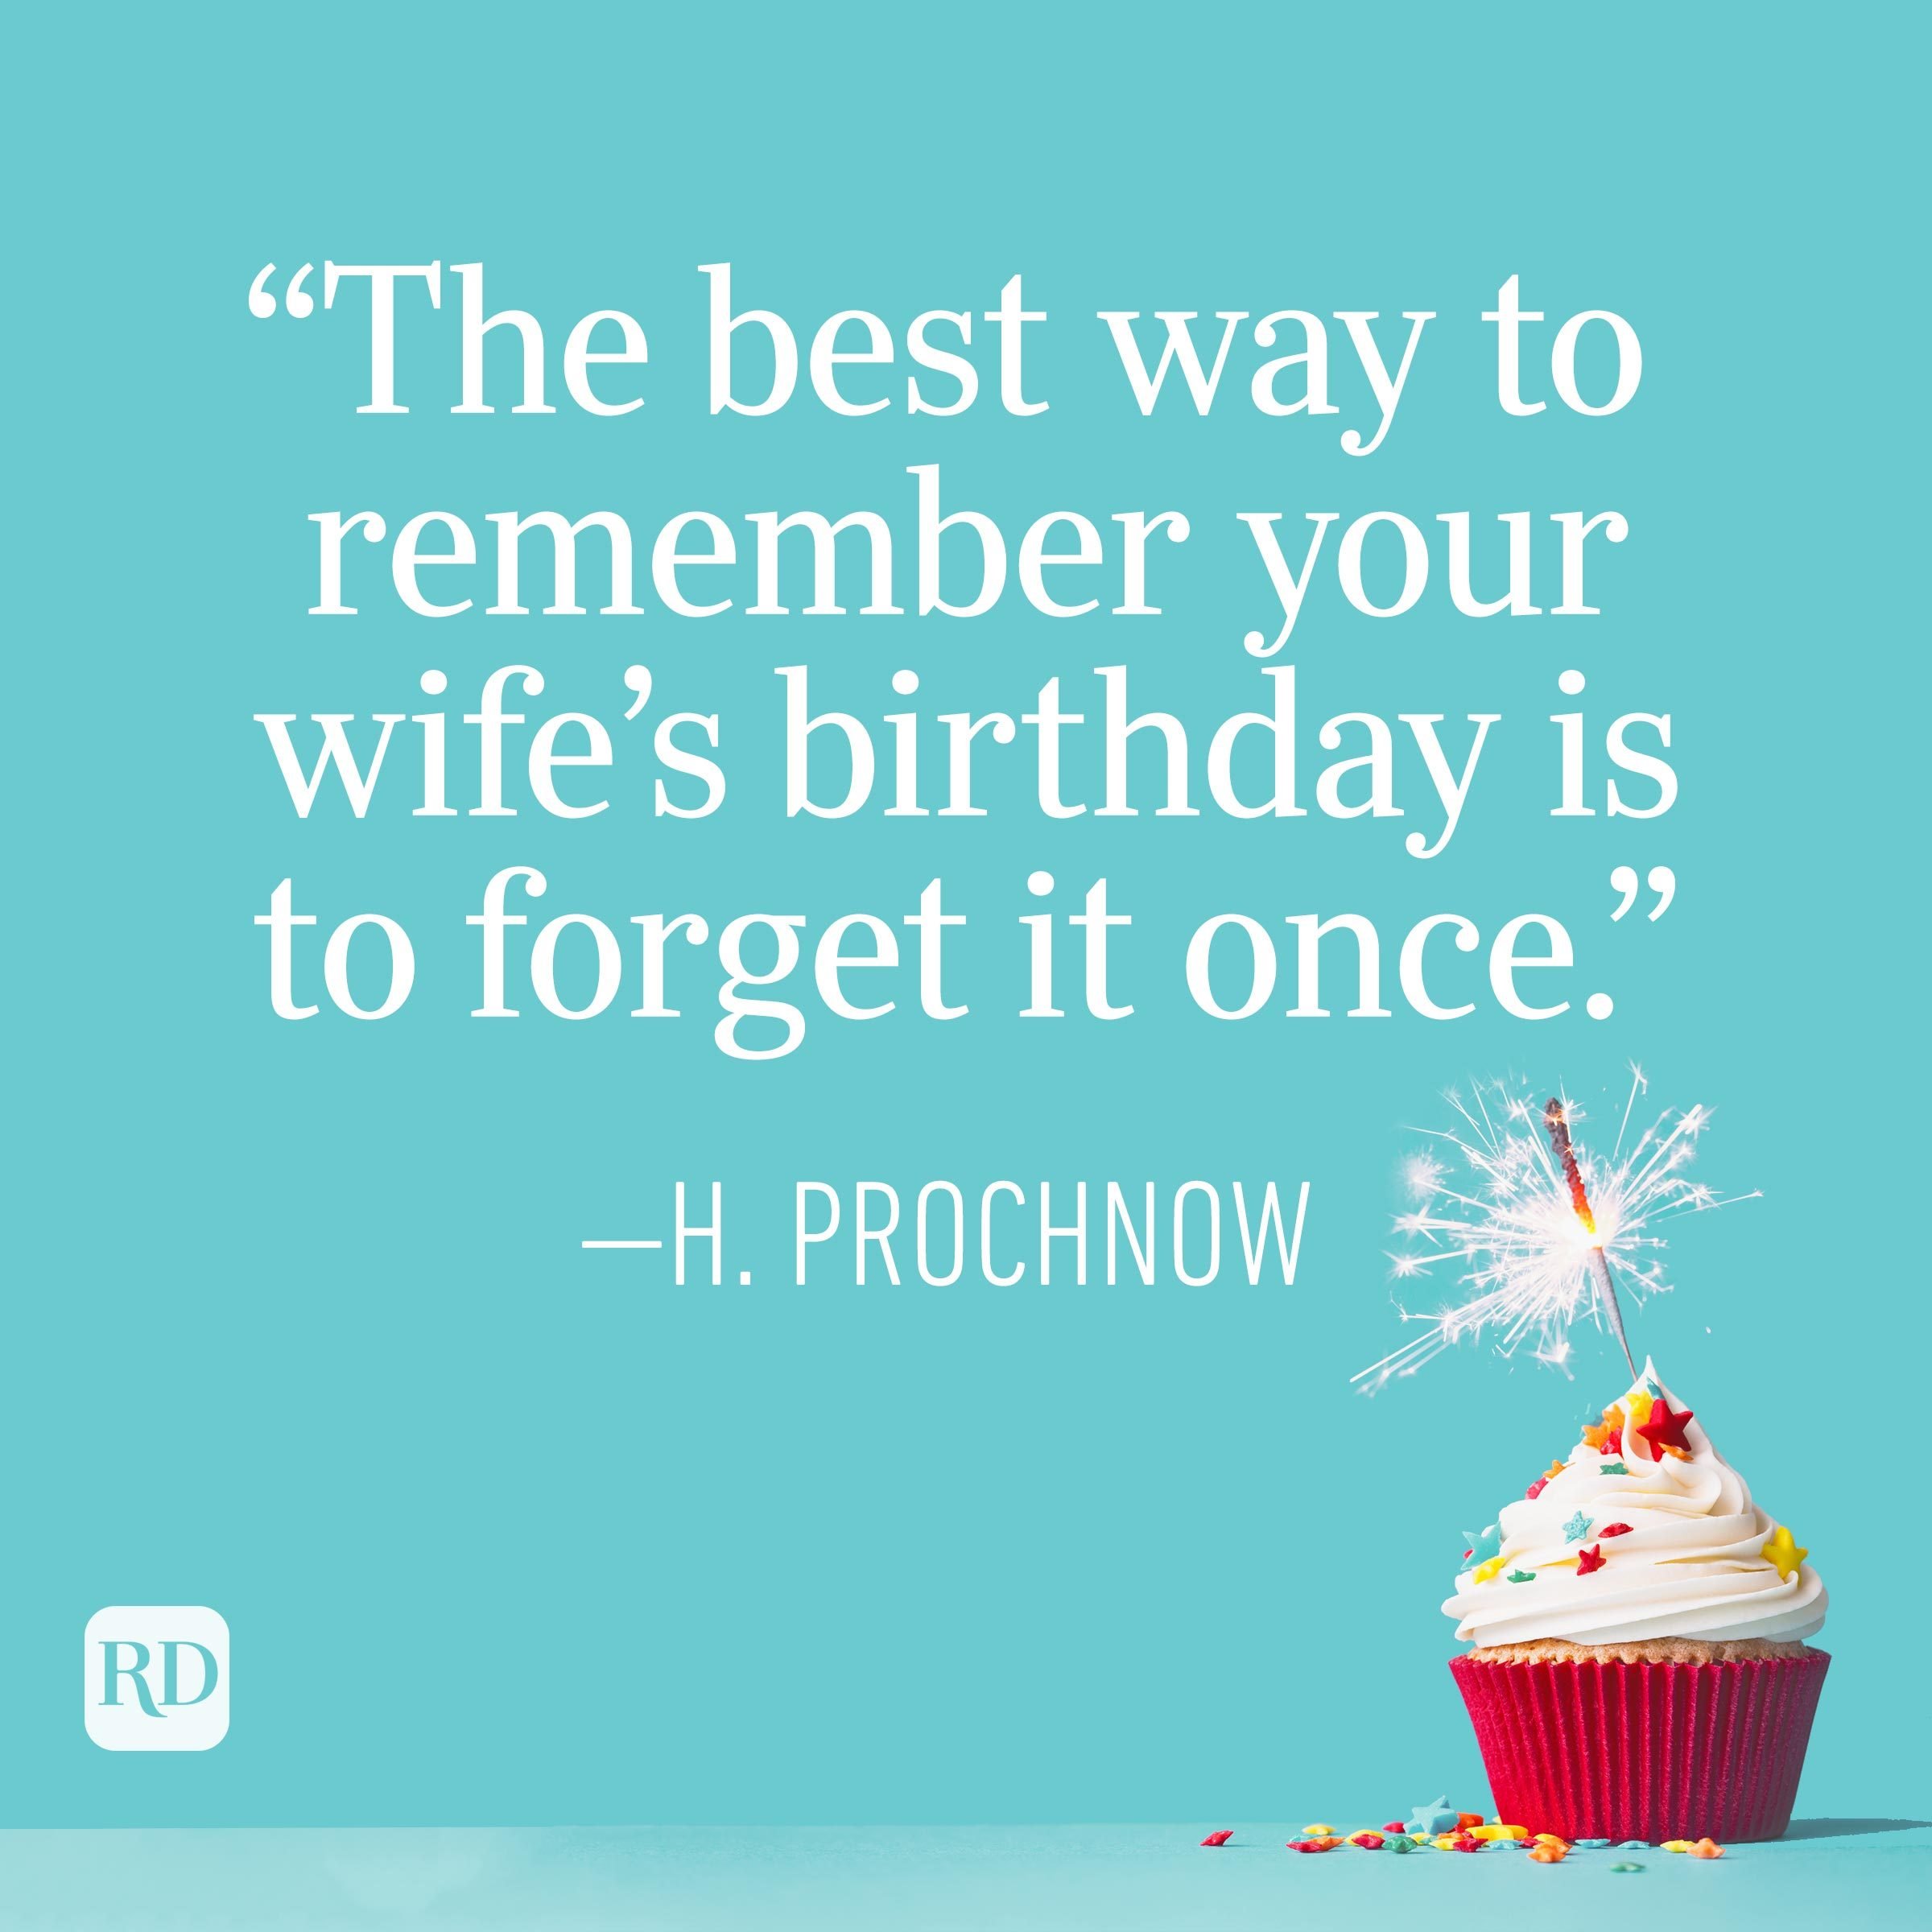 "The best way to remember your wife's birthday is to forget it once." —H. Prochnow